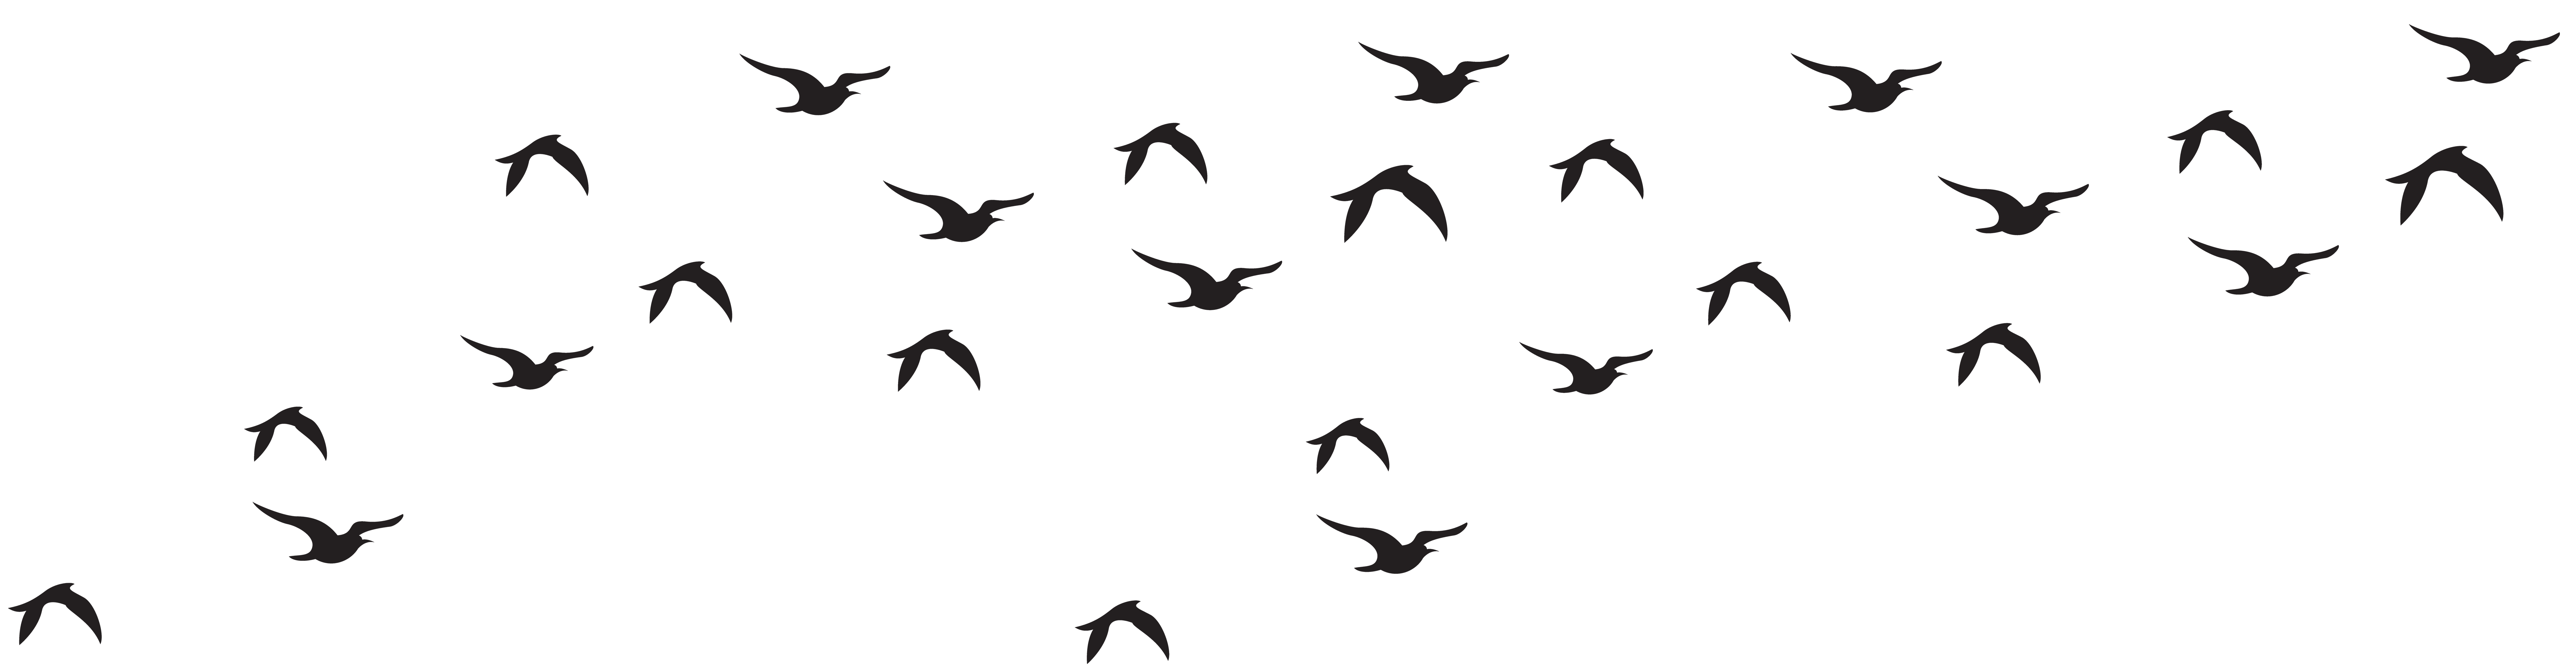 Birds Flying Png image #3504